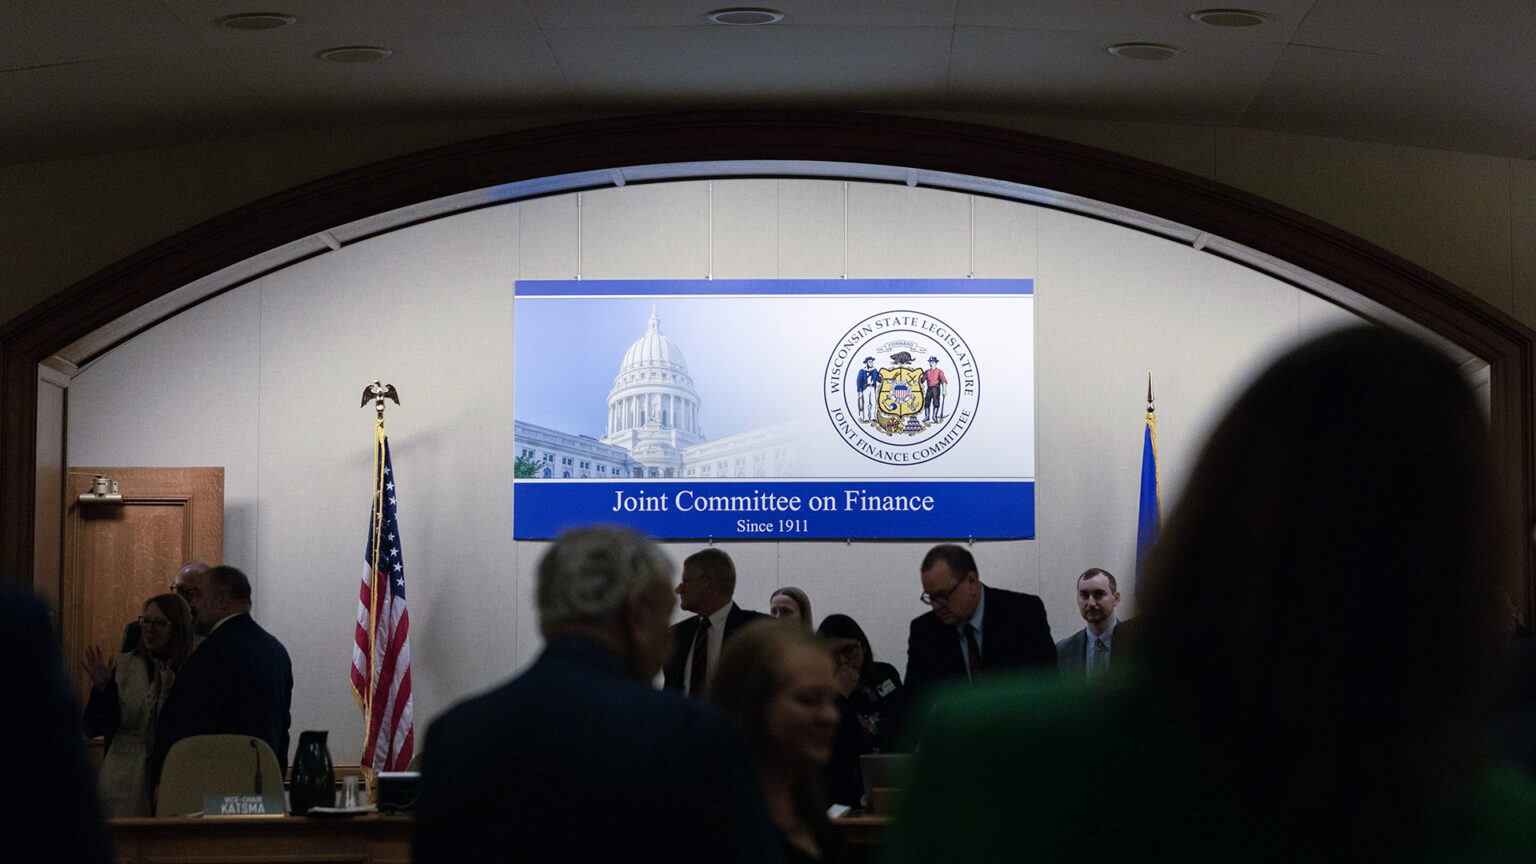 A sign showing a photo of the Wisconsin State Capitol dome and the state seal along with the words Joint Committee on Finance and Since 1911 is mounted on a wall in a room with an arched entryway, with people in shadow standing among desks and the U.S. and Wisconsin flags.